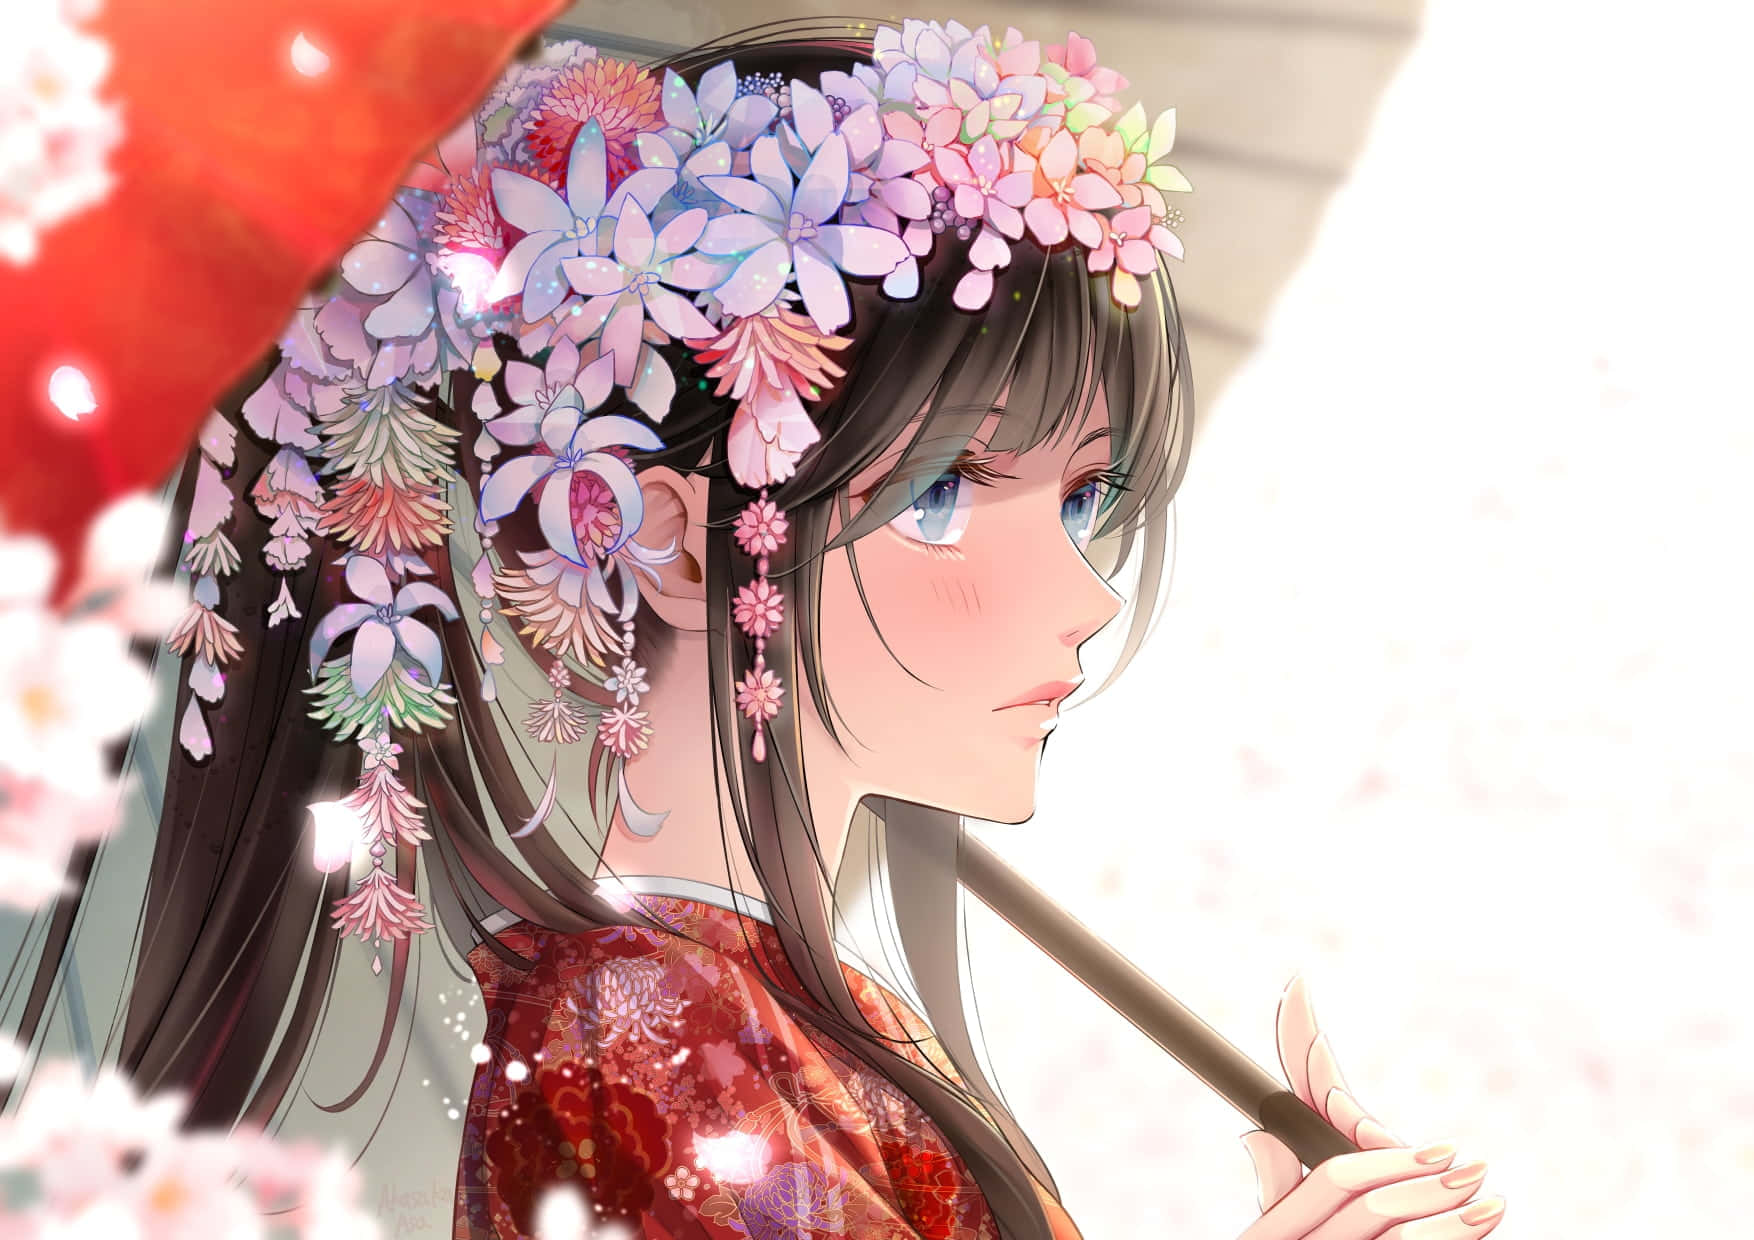 Portrait of an anime girl against a background of flowers. Anime